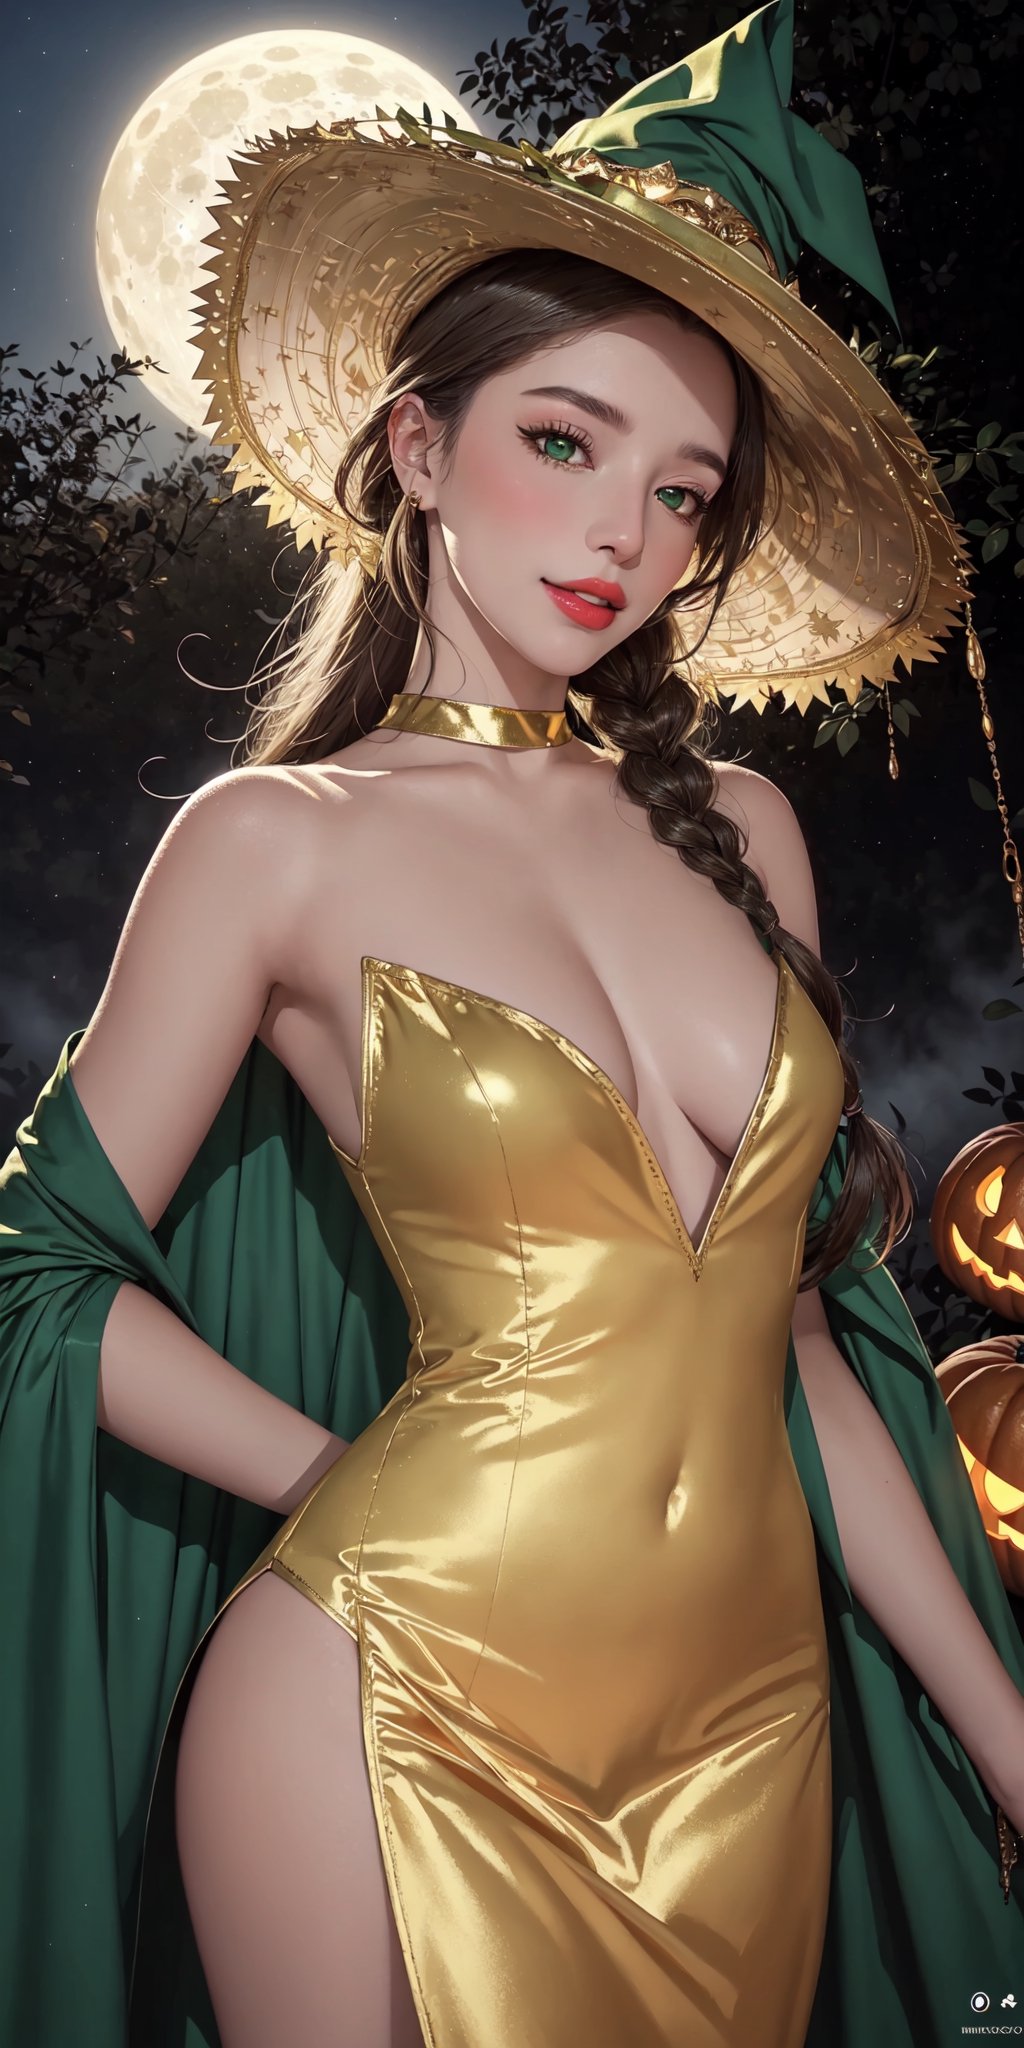 royal, princess, crown, atmospheric scene, masterpiece, best quality (detailed face, detailed skin texture, ultra detailed body), (cinematic light: 1.1), r0seb7rne-smf, extremely detailed CG, unity 8k wallpaper, ultra detailed, very detailed |


1girl, long golden hair, two braids, witch hat, black hat with green details, gold lipstick, emerald green eyes, glowing eyes, magical eyes, golden fire on the left eye, detailed eyes, light up eyes, eyelashes, expression of pleasure on the face, smile, magical forest, fireflies, distant town, skeletons, owl, owl, bats, halloween, Jack-o-lanterns illuminating a winding path as a background, white dress with gold details, long dress, sexy dress, neckline dress, green cape, ojas cape, green nails, white skin, shiny skin, oiled skin, floating magic symbols, full moon, night sky, night, clear sky, full moon, moonlight, blue color atmosphere , fog